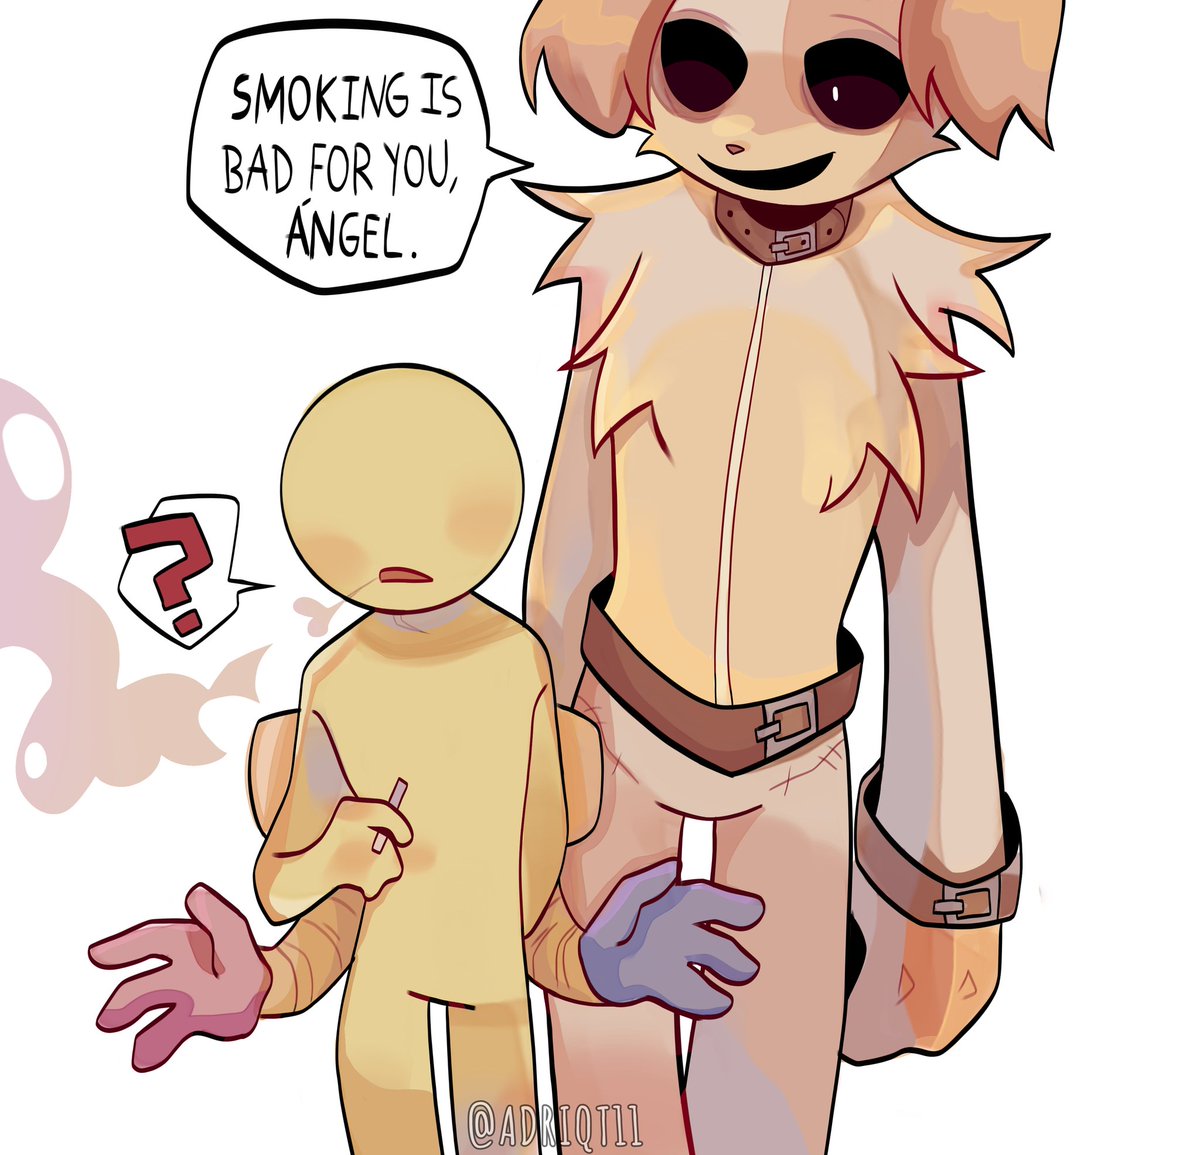 Smoking is bad for you‼️

[ I had the idea while I was in class, Dogday doesn't really like the smell of cigarettes. 🦔]
#PoppyPlaytimeChapter3 #PoppyPlaytime #SunnyAngel #dogday #SmilingCritters #SmilingCrittersFanart ★